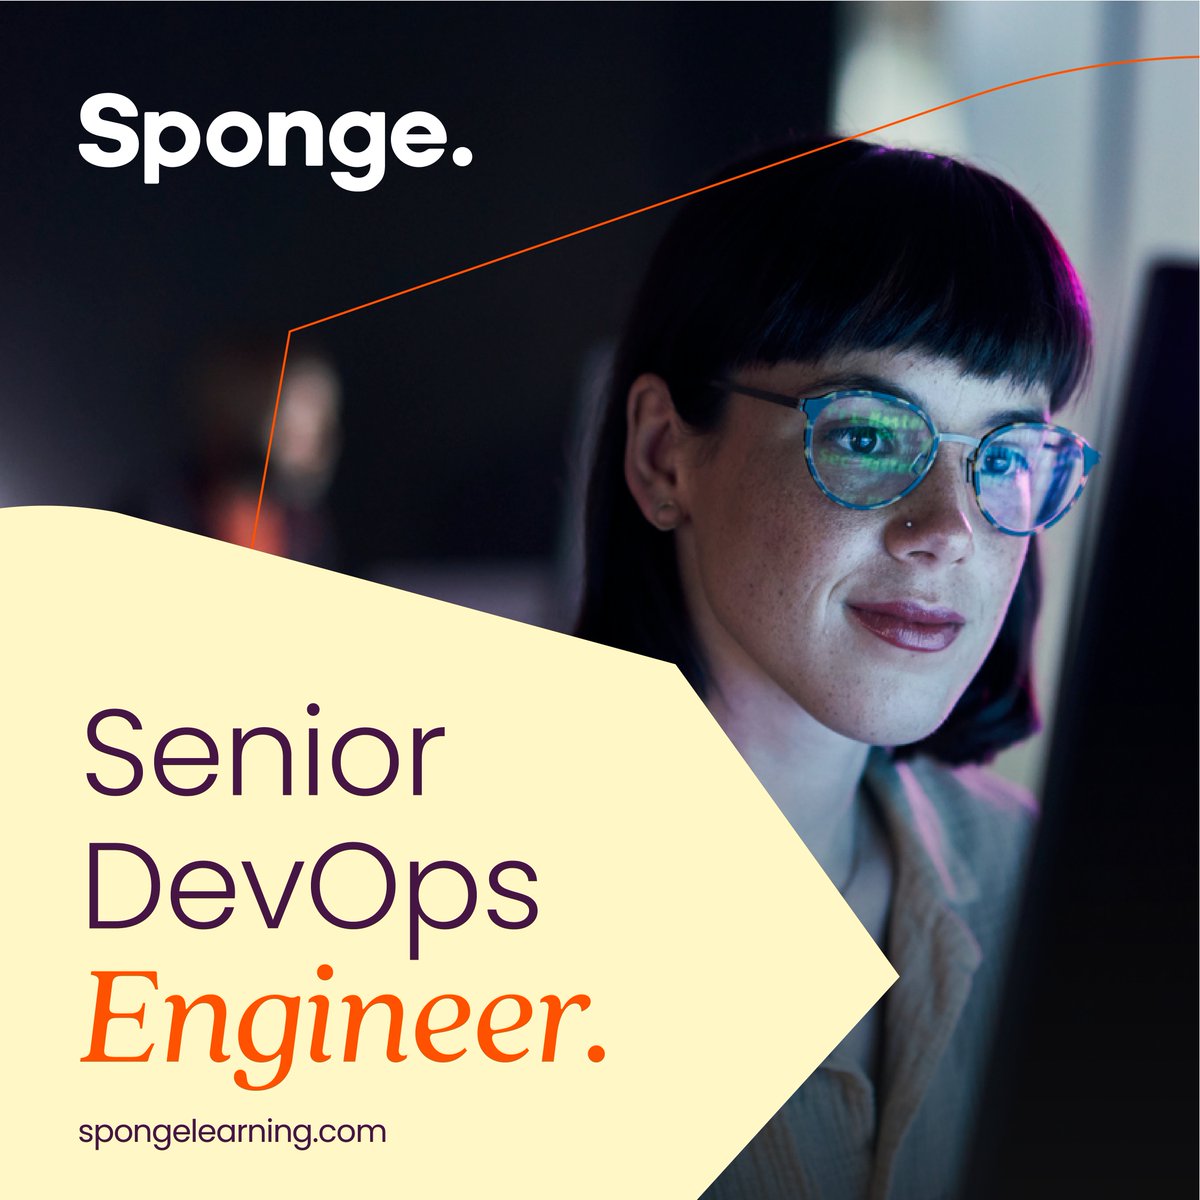 Are you a tech wizard looking to put your abilities to the test in the creative world of digital learning? We're looking for a Senior DevOps Engineer to join our fantastic tech team. If you think that could be you, click here to learn more: hubs.li/Q02jNJRH0